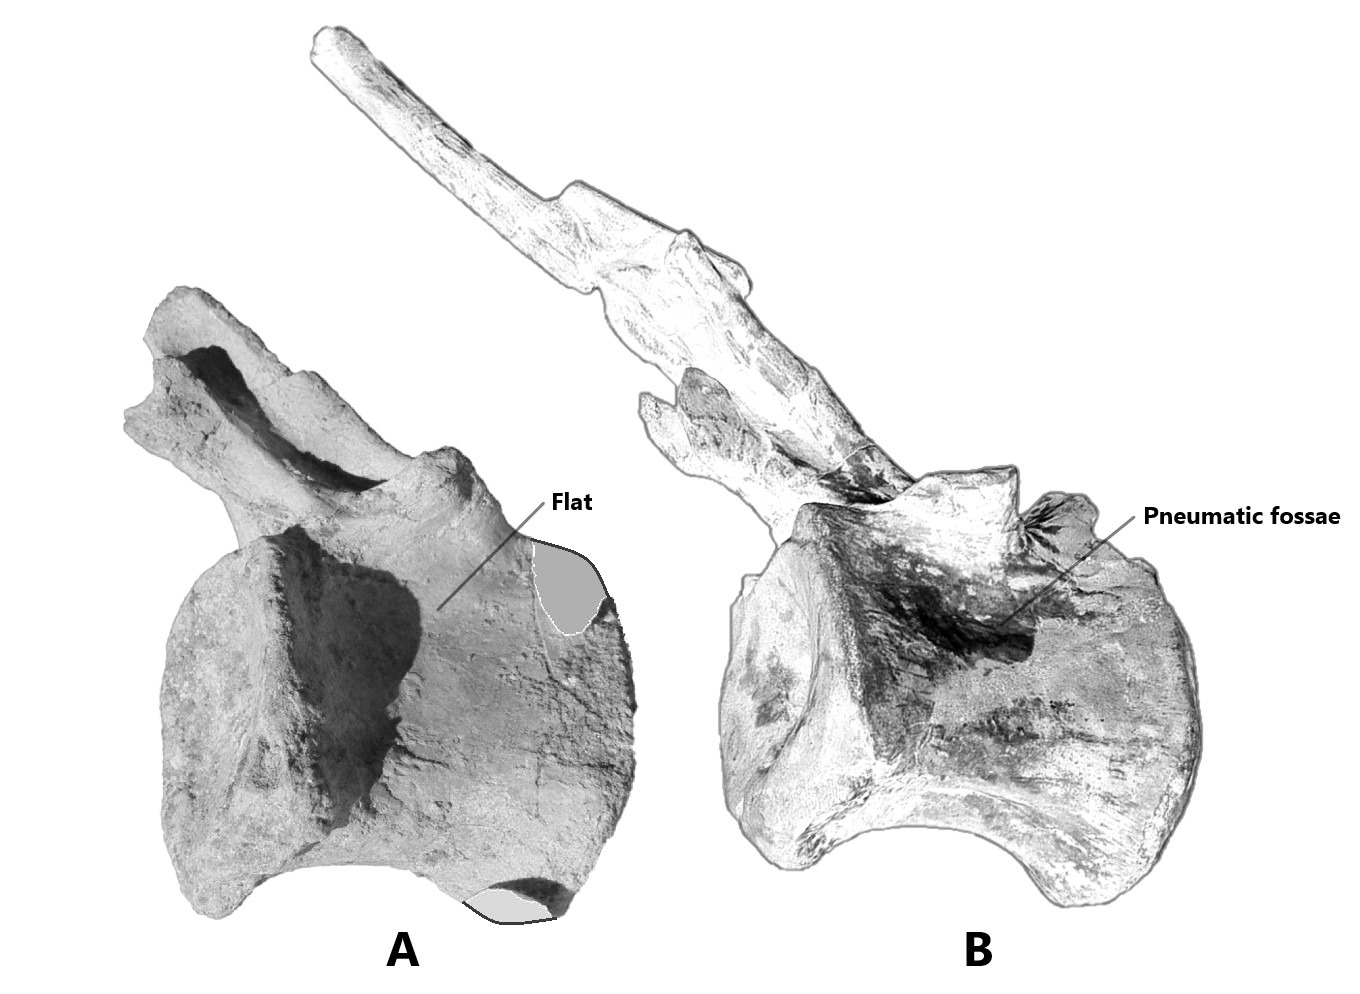 Side by side comparison of both mid caudal vertebrae of Alpha Male 9109 (tentatively refer as Spinosaurus dorsojuvencus) and Spinosaurus aegyptiacus neotype (FSAC-KK 11888)[5][6]. From left to right: A. Mid caudal vertebra (R393243465120) of Alpha Male 9109 in right lateral view, vertebra centrum appears flat without pneumatic fossae; B. Mid caudal vertebra (FSAC-KK 11888, refer as position Ca16) in right lateral view (flipped image), top portion centrum of vertebra contains pneumatic fossae.